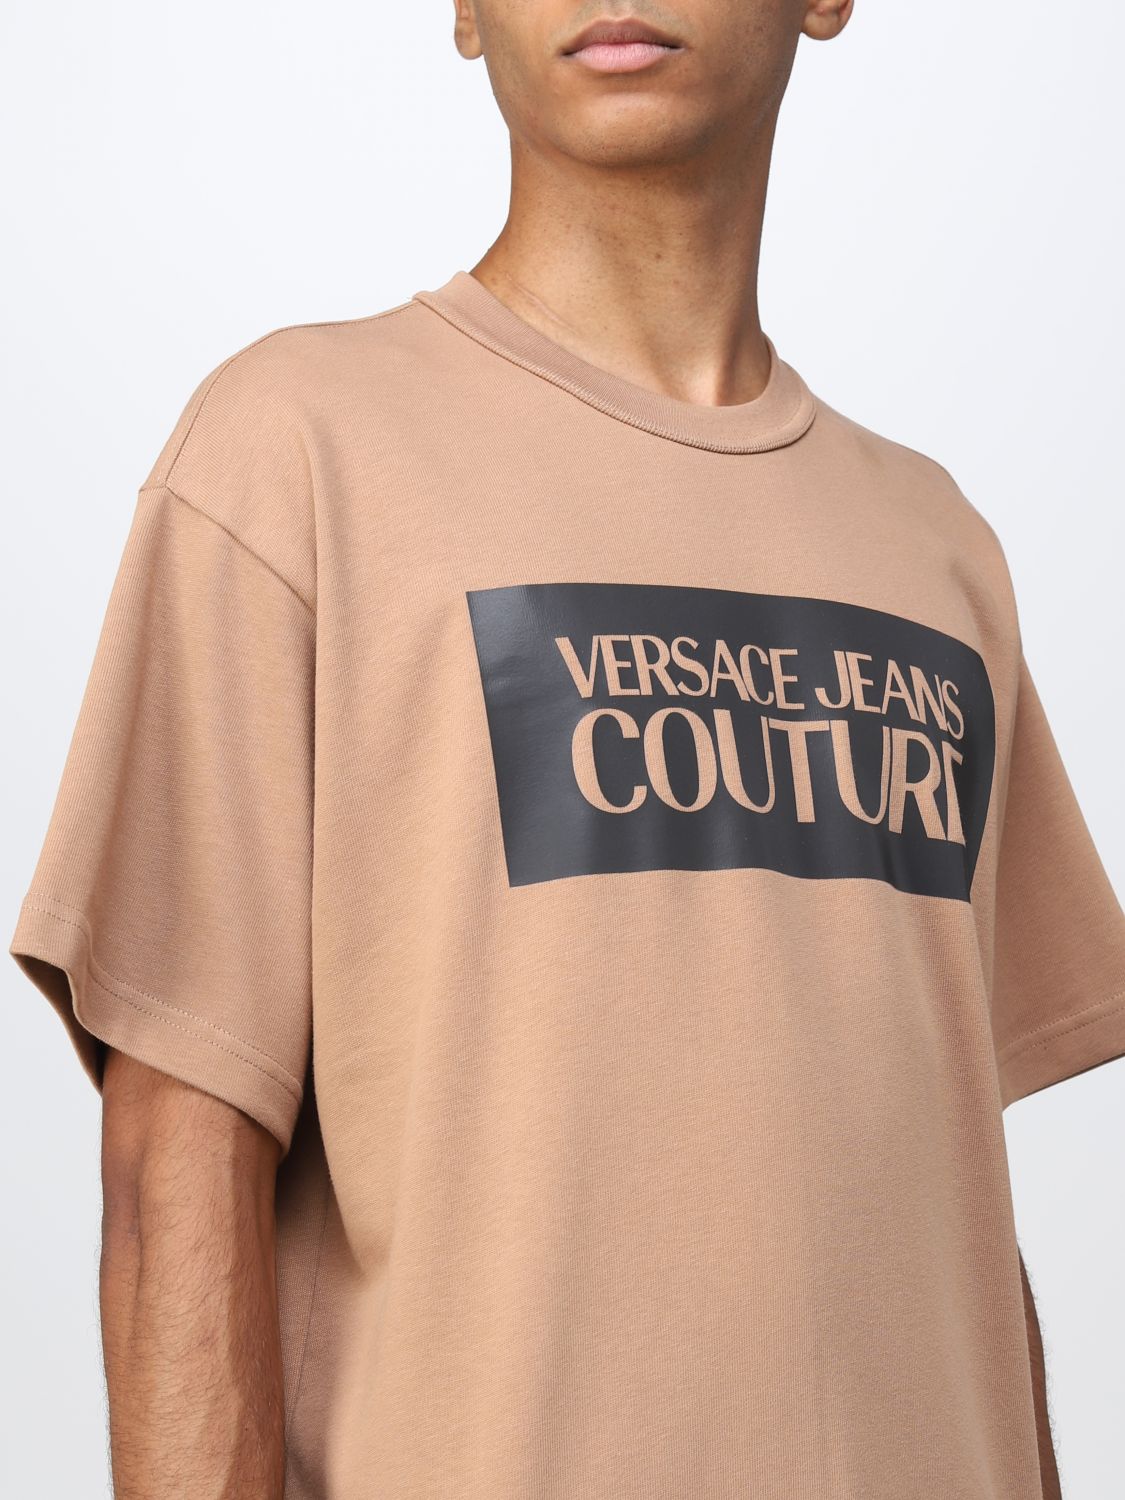 VERSACE JEANS COUTURE：Tシャツ メンズ - サンド | GIGLIO.COMオンラインのVersace Jeans